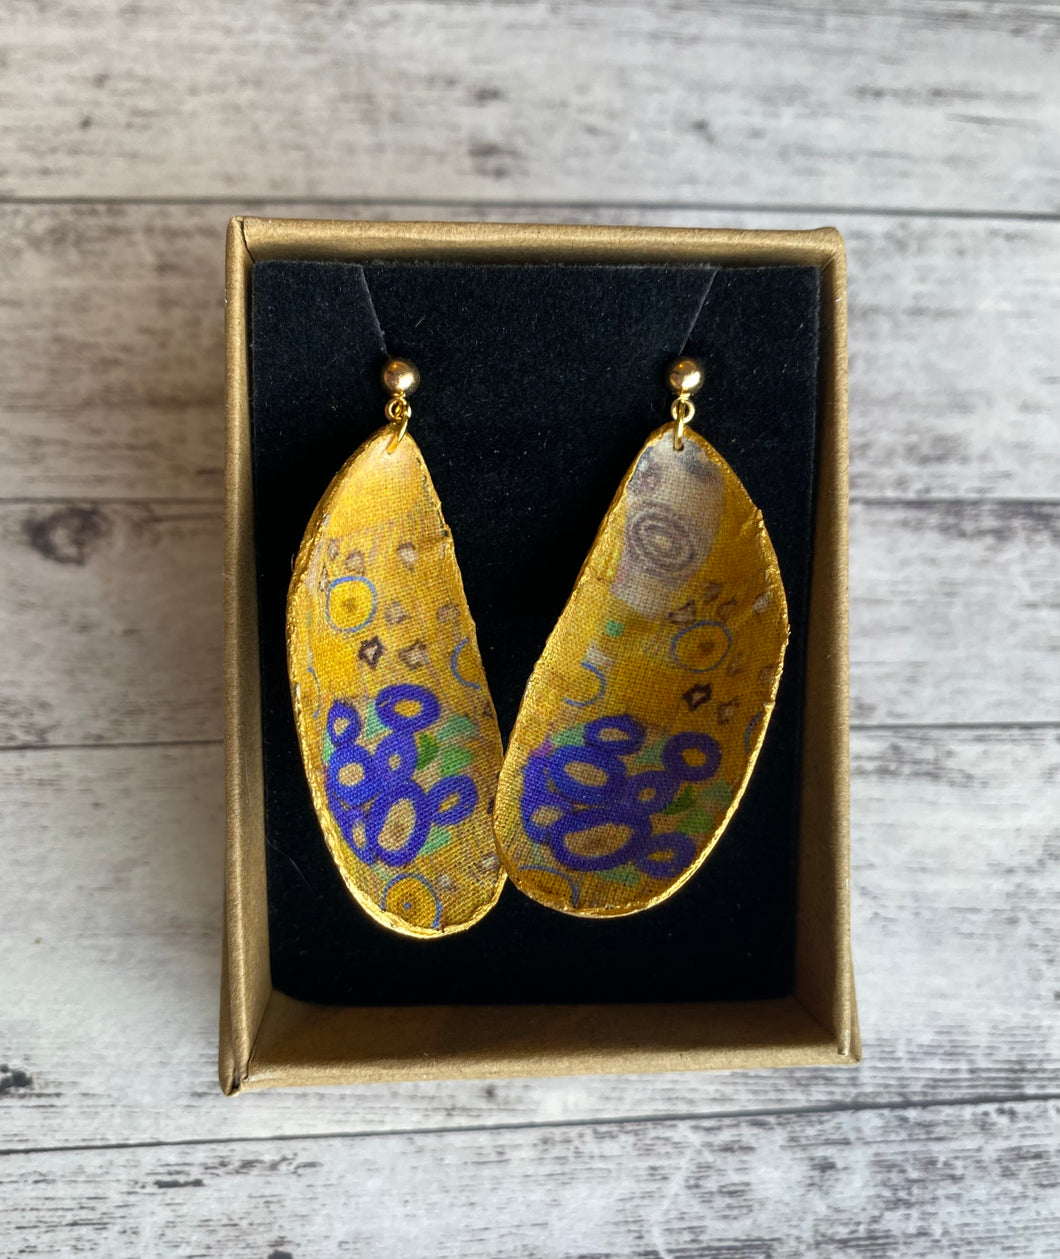 fabric mussel shell earrings sustainable earrings sustainable style irish design Irish jewellery design hypoallergenic the kiss Gustav Klimpt gold style fabric earrings mussel shell jewellery